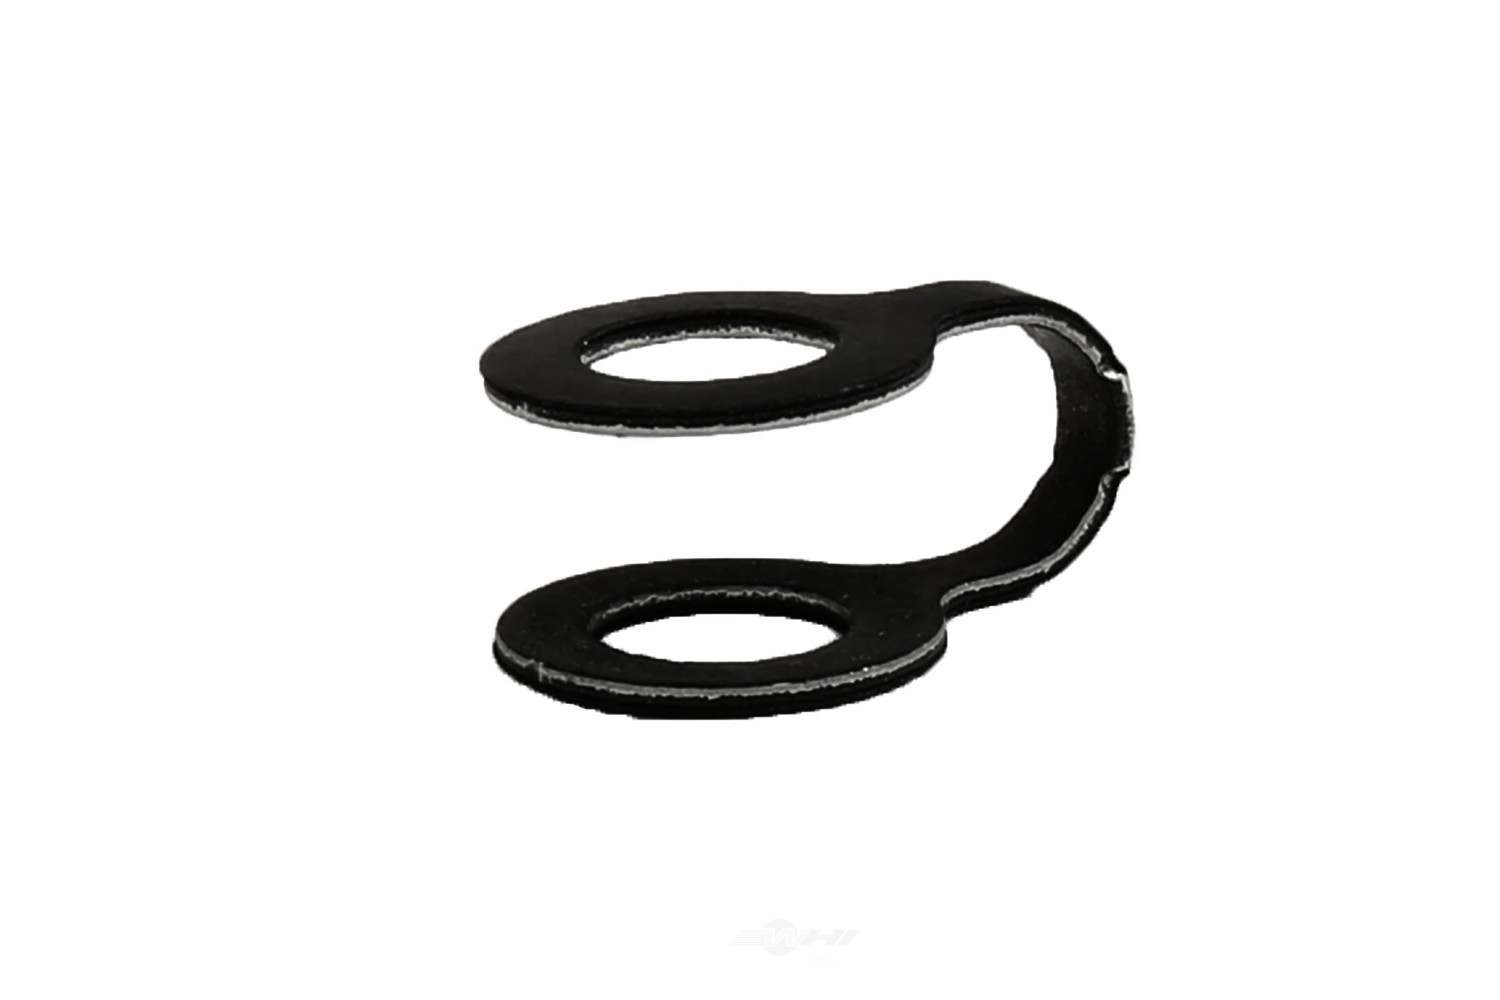 GM GENUINE PARTS CANADA - Fuel Feed Pipe O-Ring - GMC 12630832